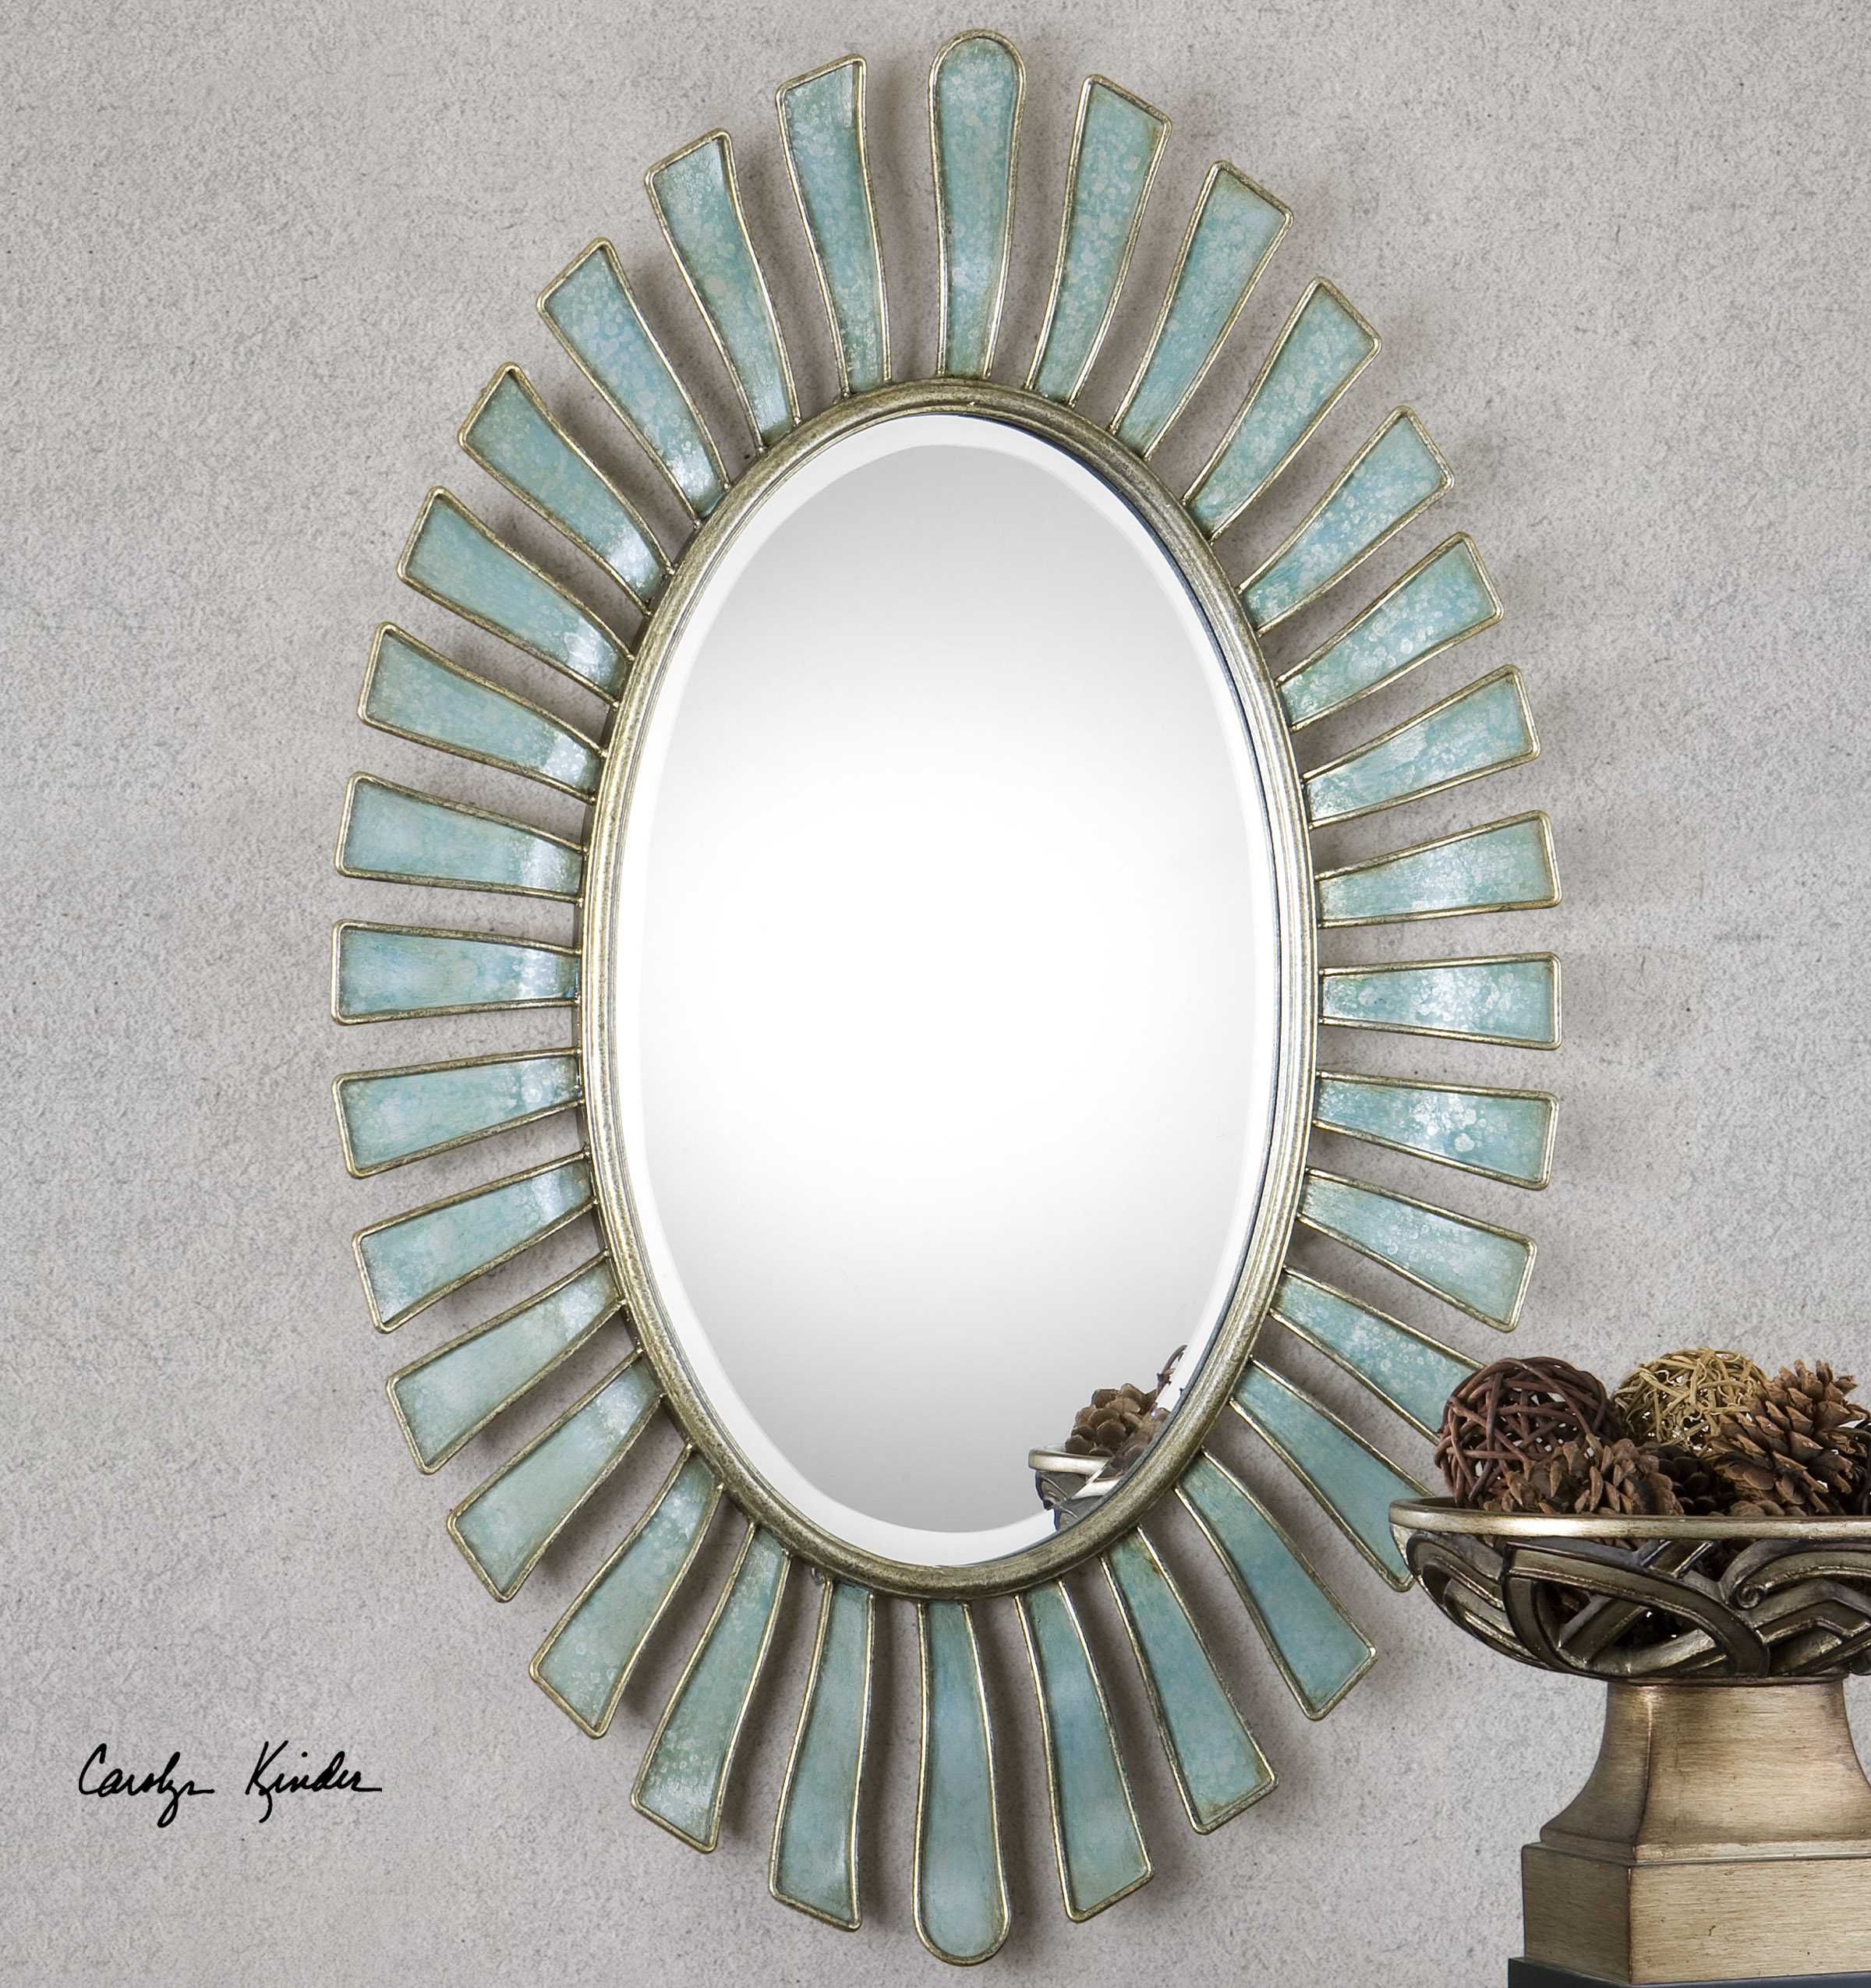 Uttermost Morvoren 27 X 40 Blue Gray Oval Wall Mirror | Ut08141 With Gray Wall Mirrors (View 11 of 15)